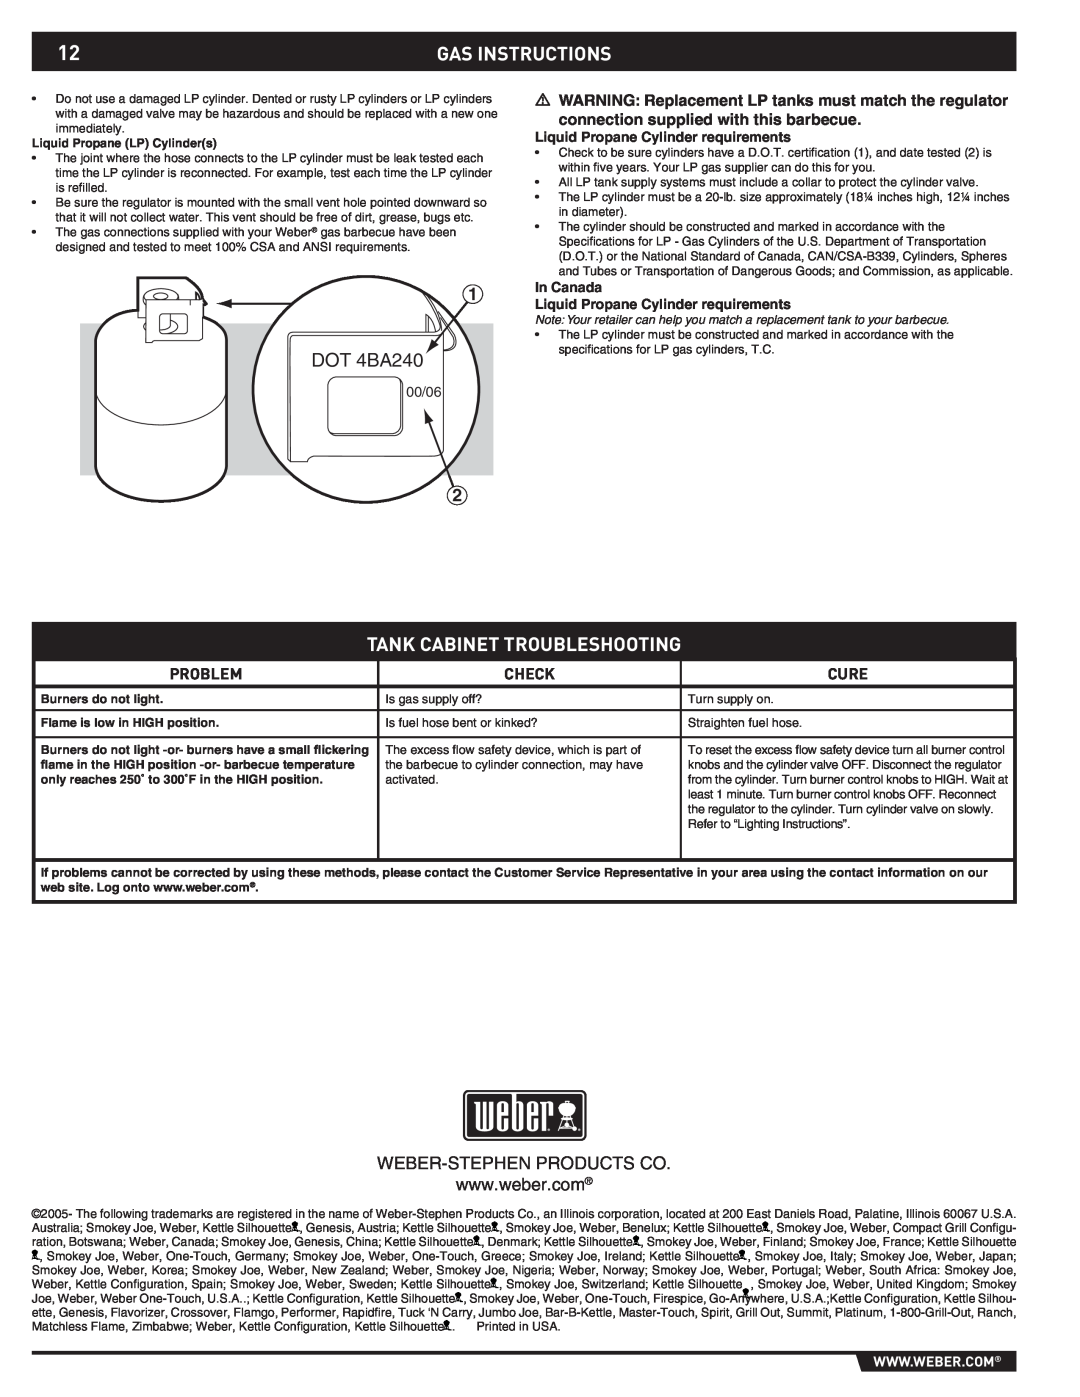 Summit 43176 manual Gas Instructions, Tank Cabinet Troubleshooting, DOT 4BA240, 00/06, Liquid Propane Cylinder requirements 